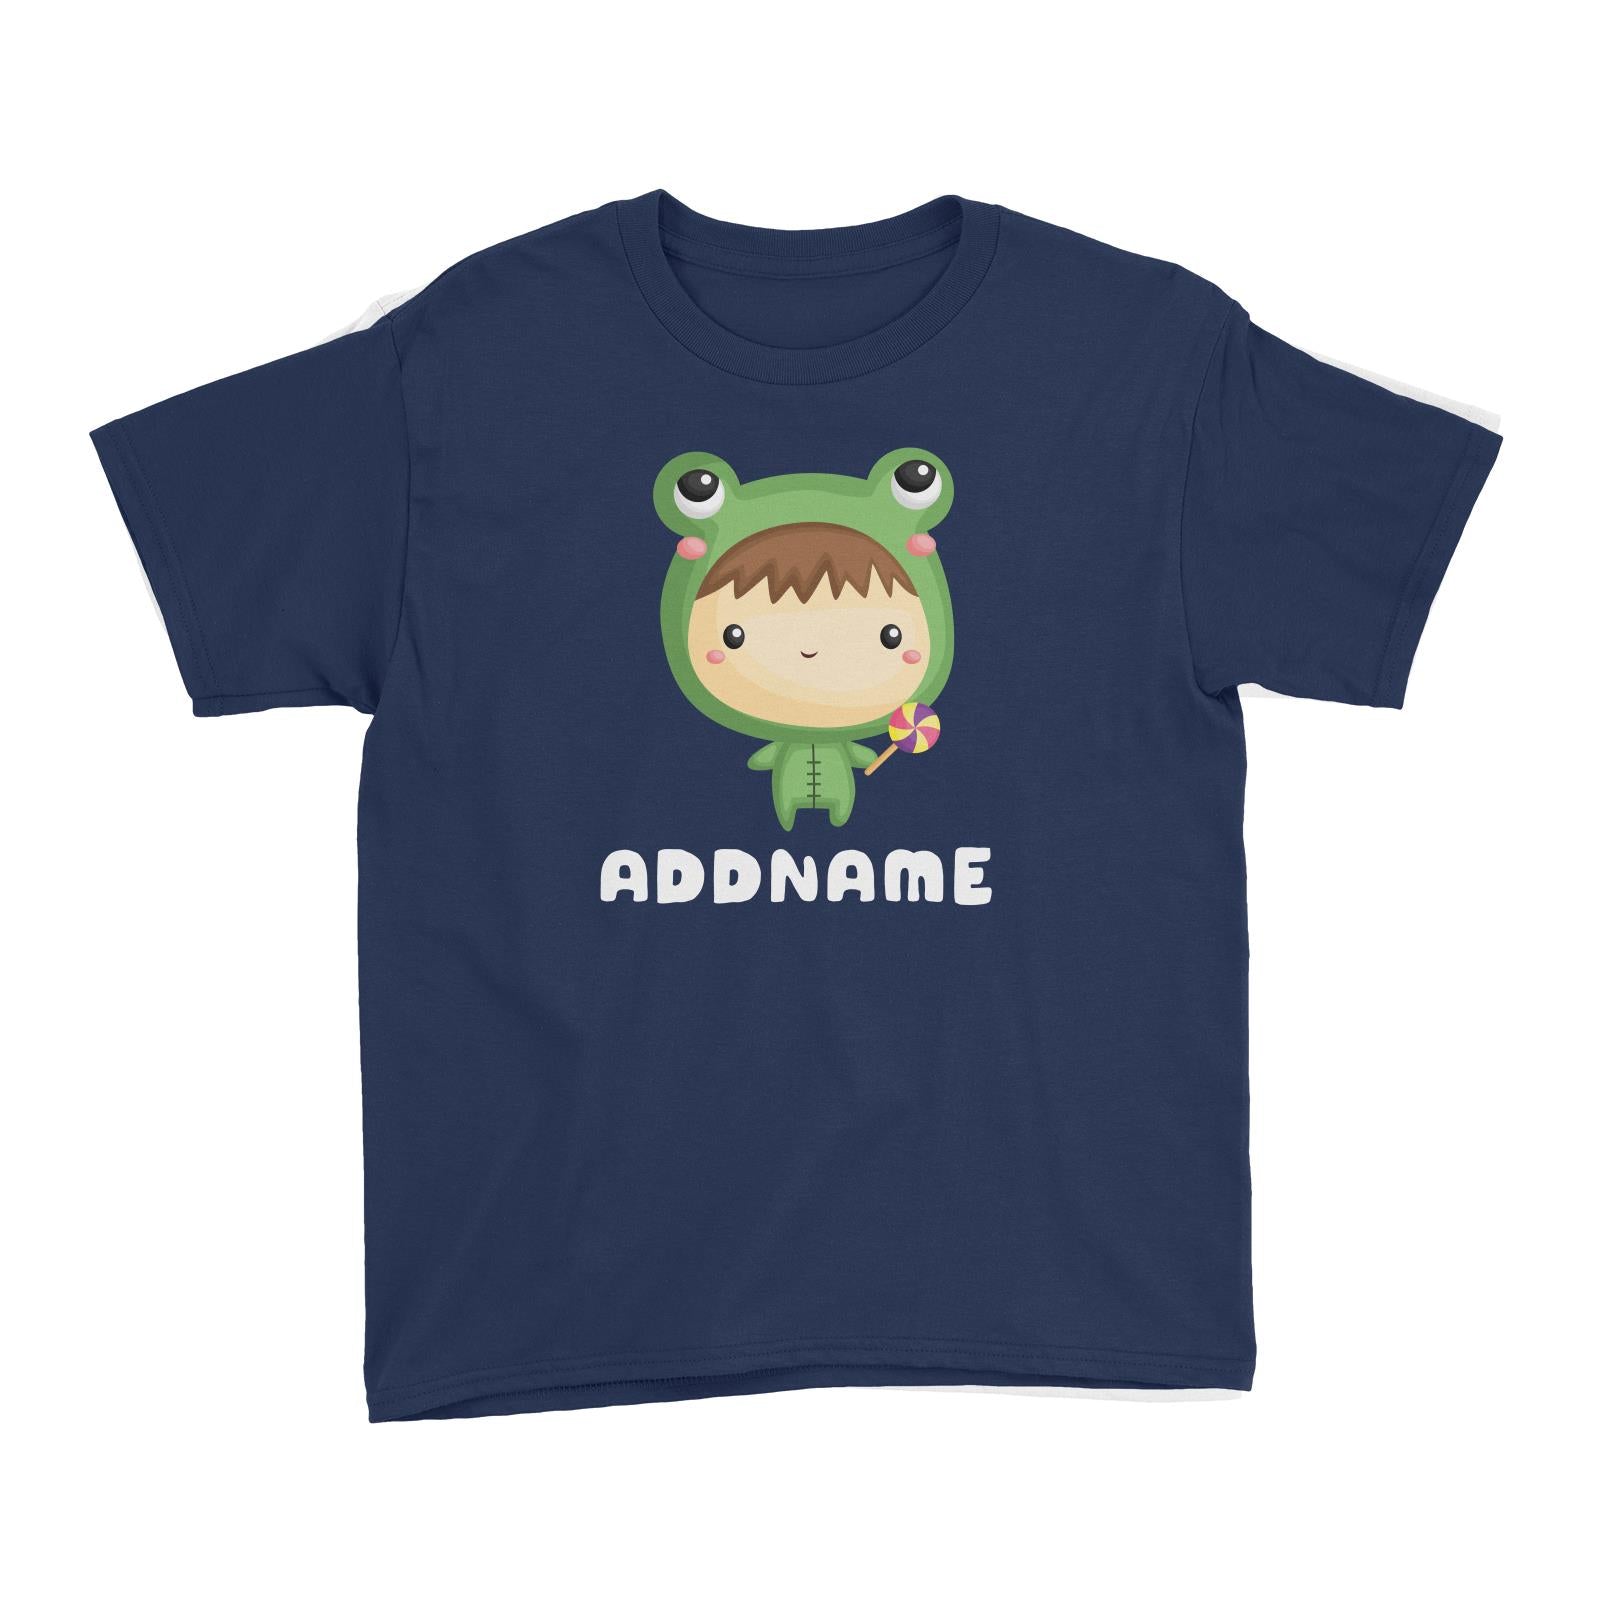 Birthday Frog Baby Boy Wearing Frog Suit Holding Lolipop Addname Kid's T-Shirt